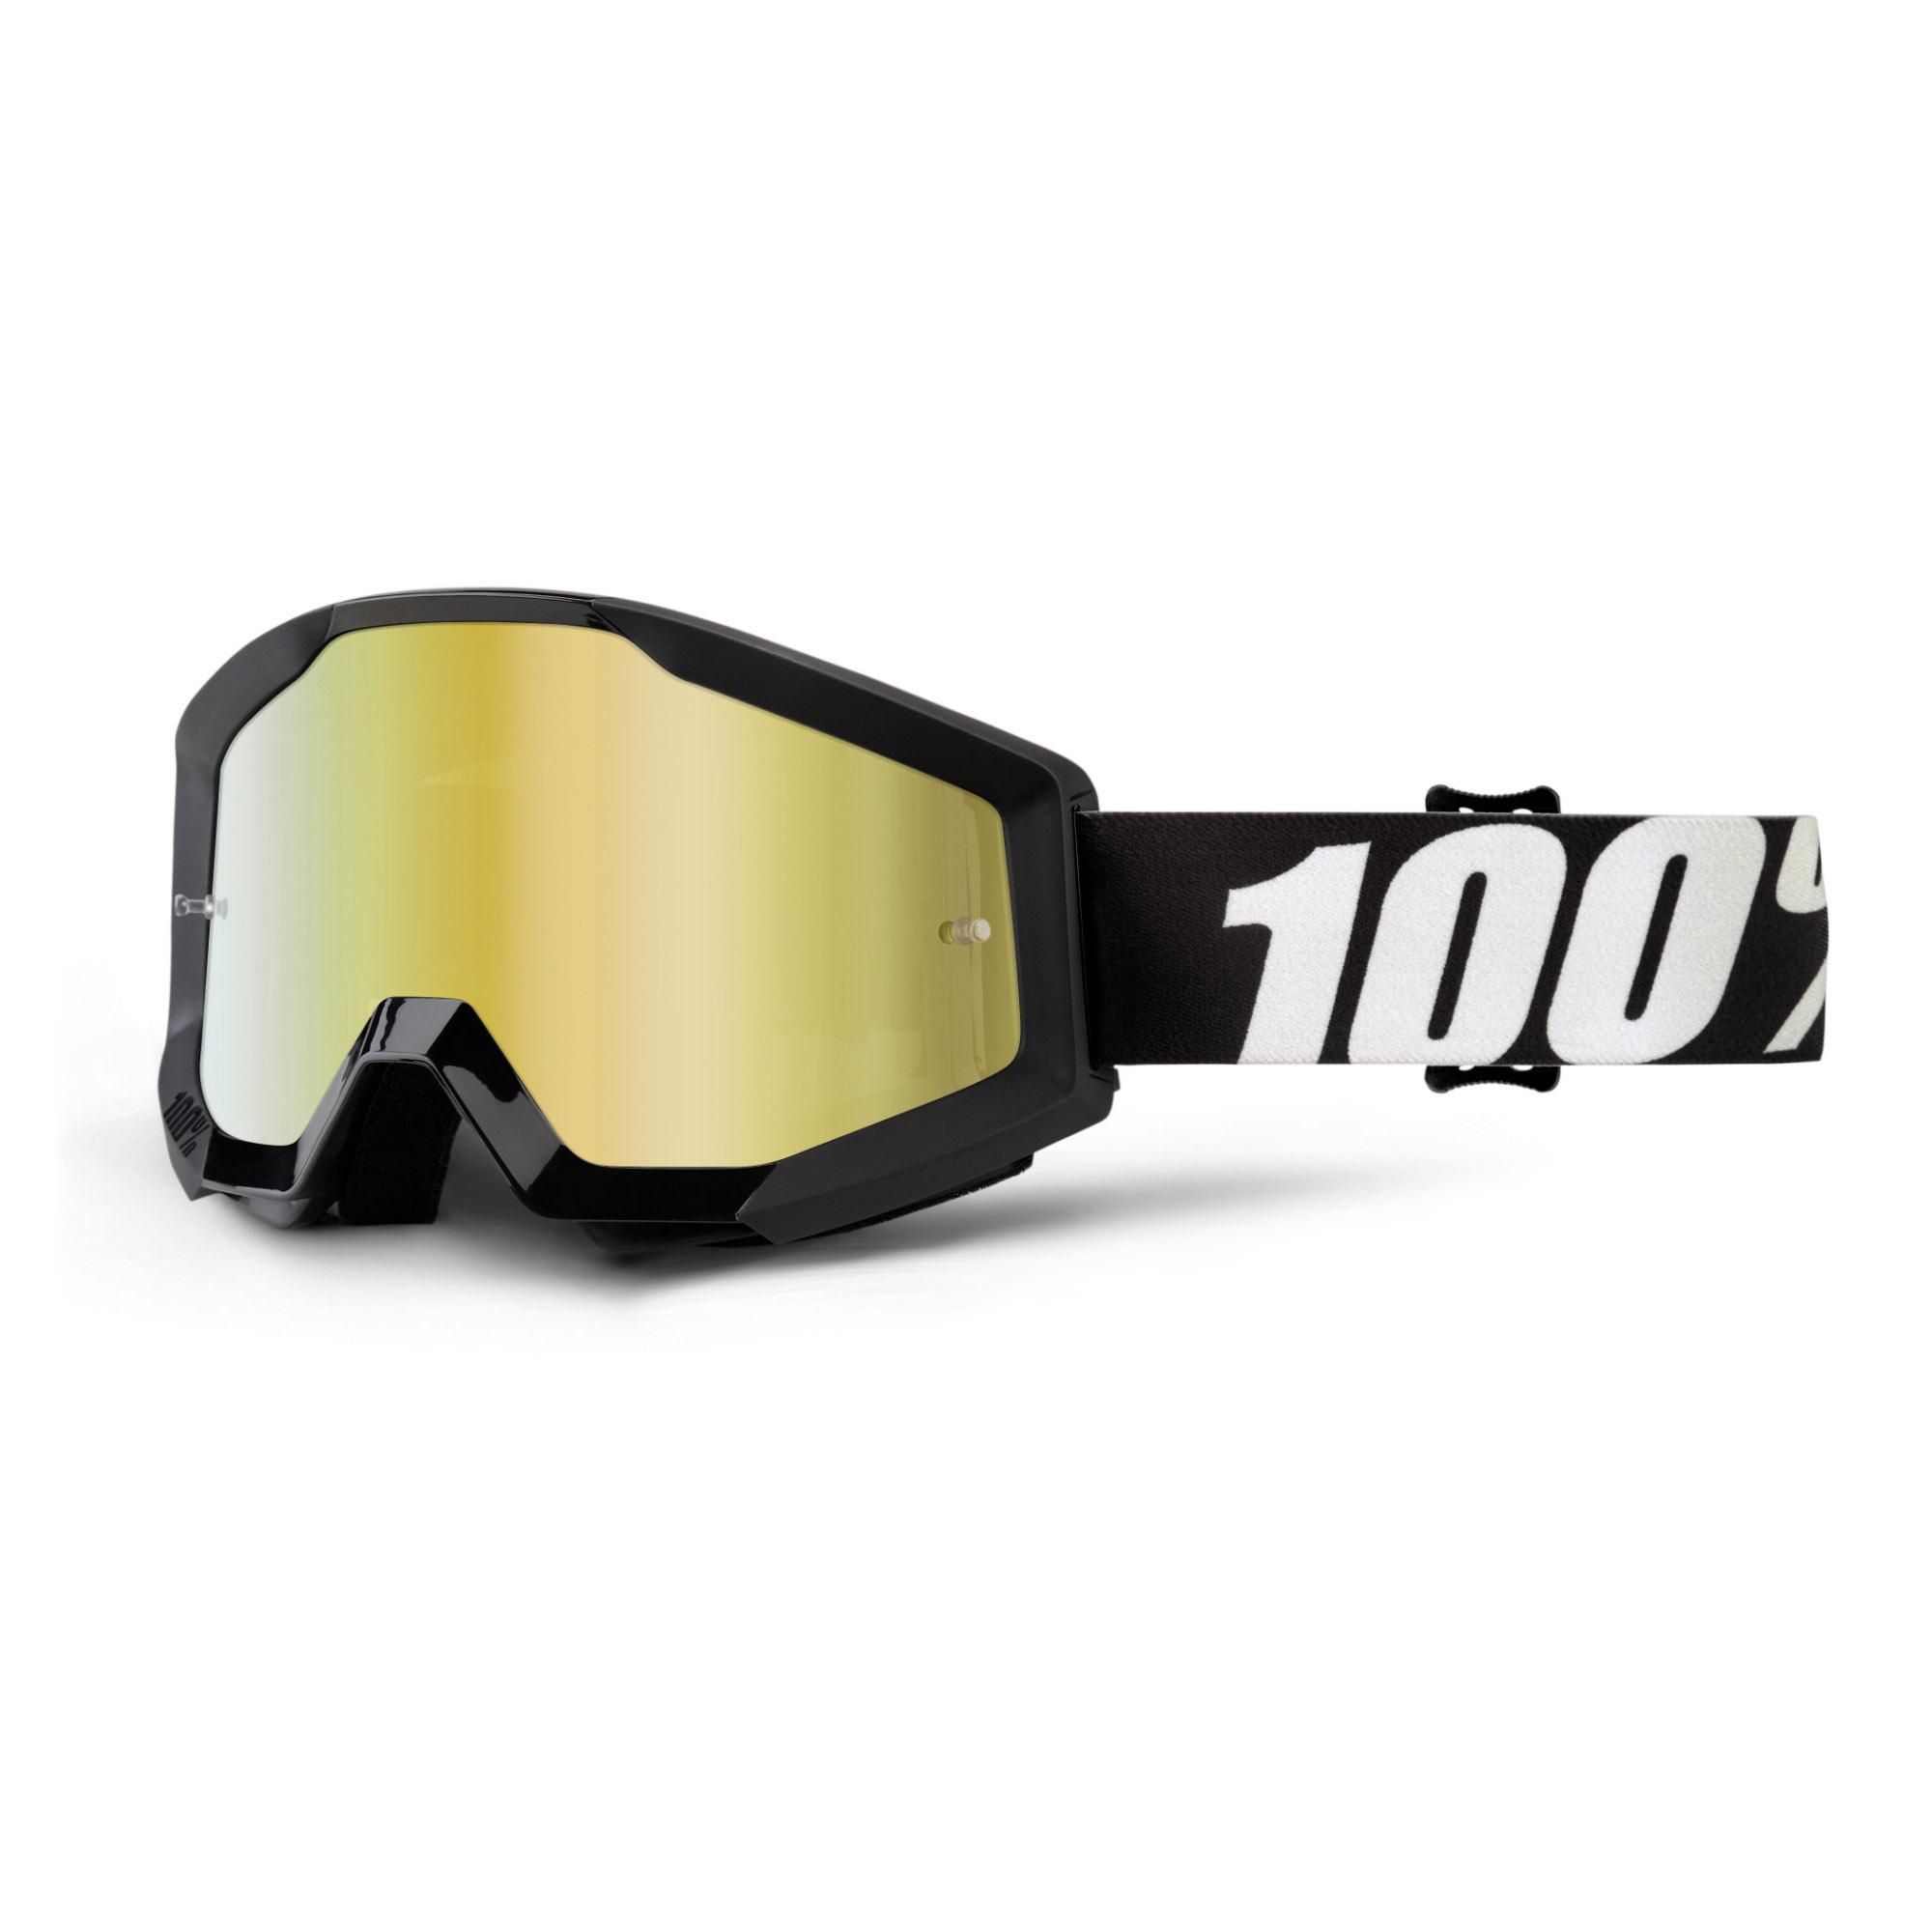 100% Strata Goggles Outlaw Gold Mirror Lens - £35.99 | Goggles | Cyclestore